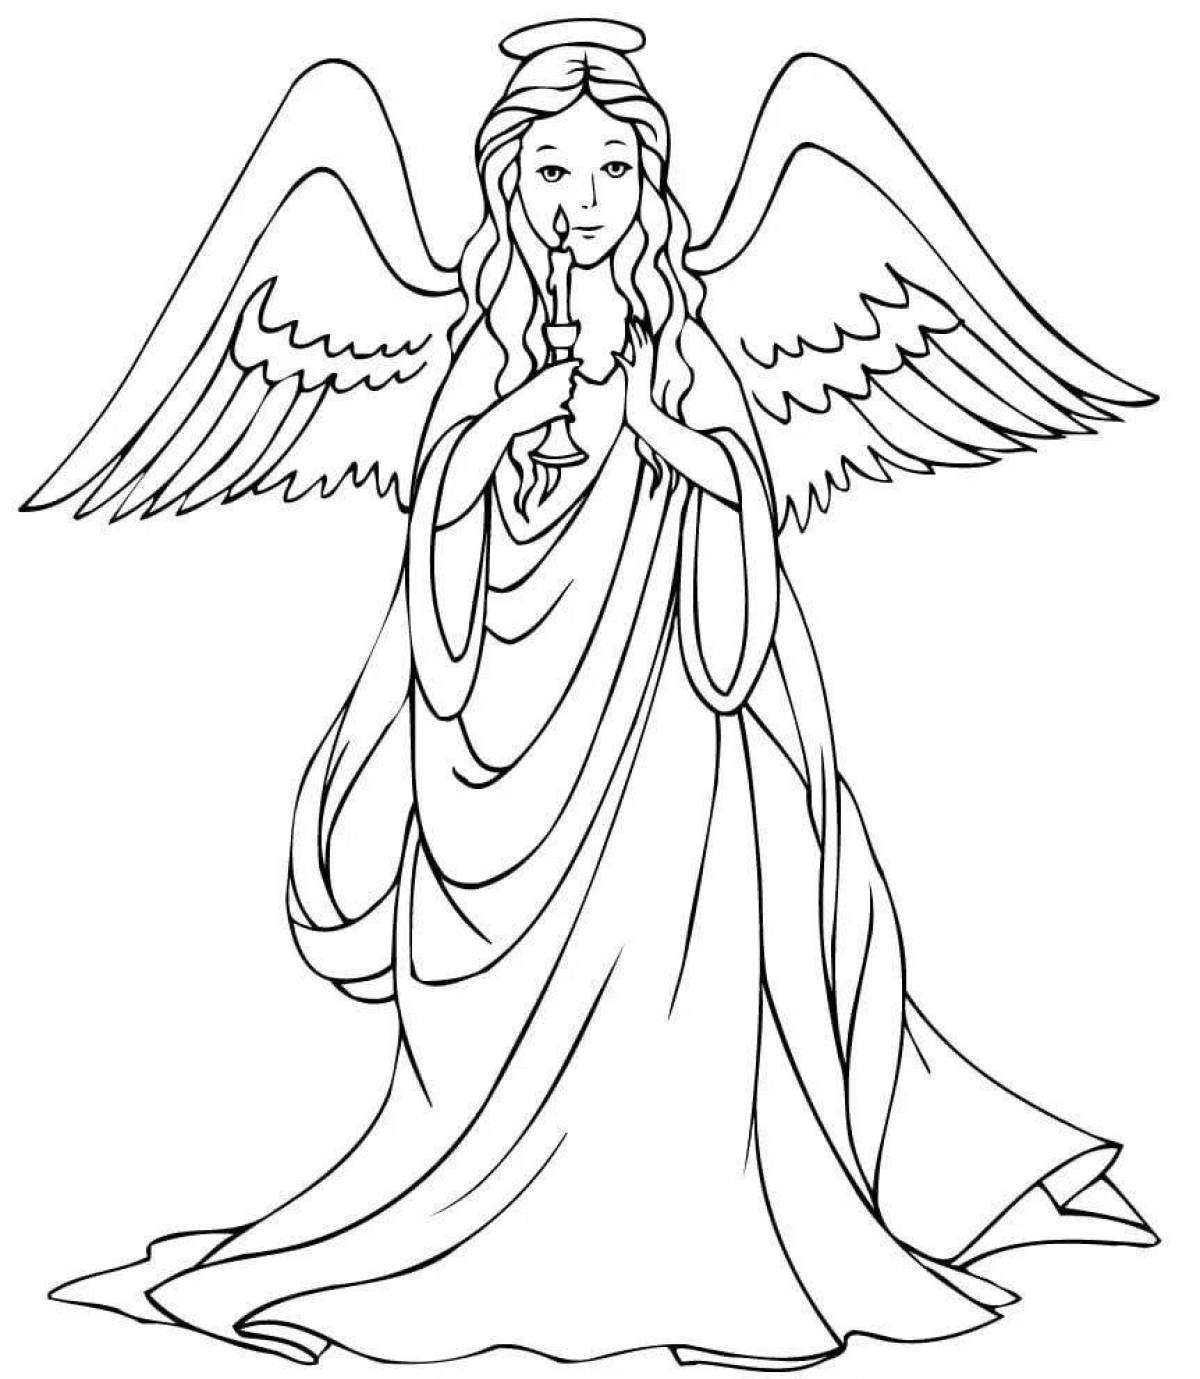 Glorious coloring angel for children 3-4 years old